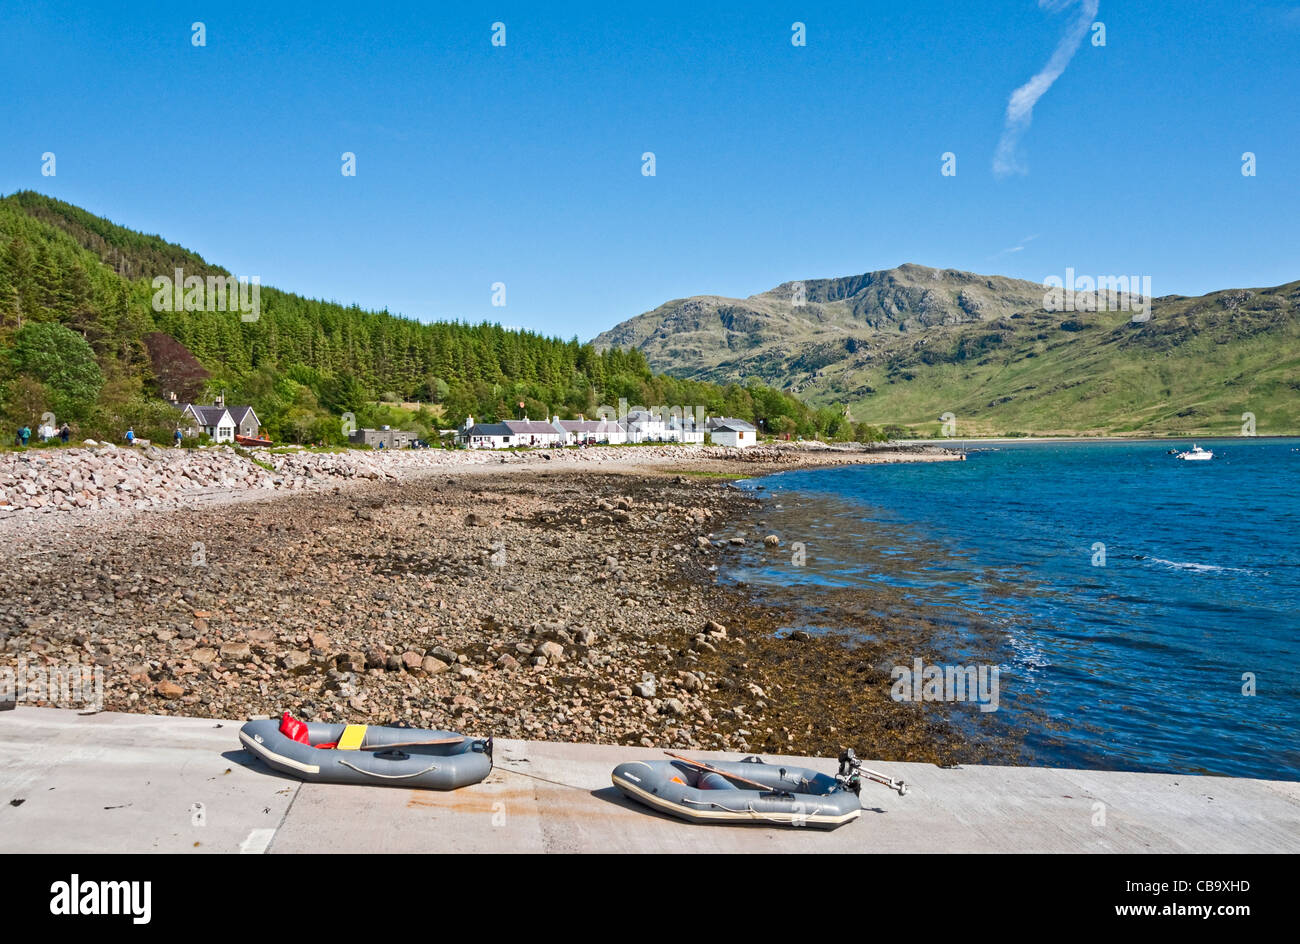 View from pier of the village of Inverie in Inverie Bay Loch Nevis on Knoydart the West Highlands of Scotland Stock Photo